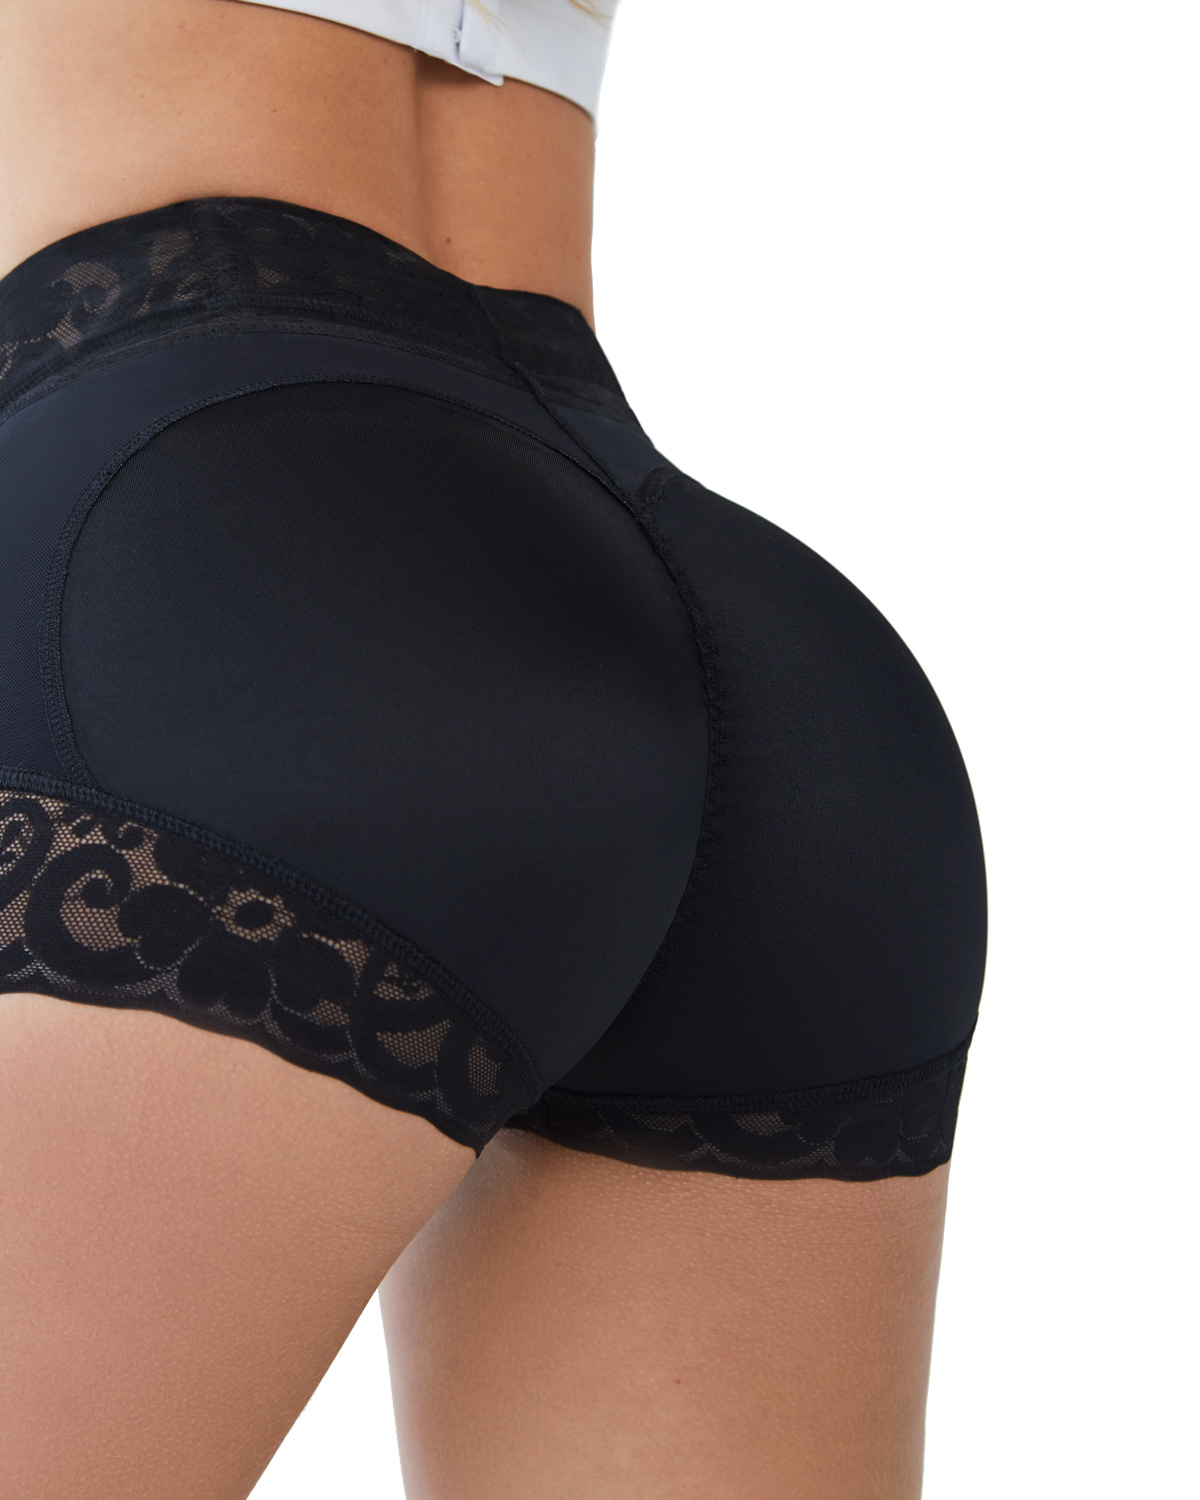 🔥Limited Time Sale 48% OFF🎉Women Lace Body Shaper Butt Lifter Panty-Buy 2 Get Free Shipping